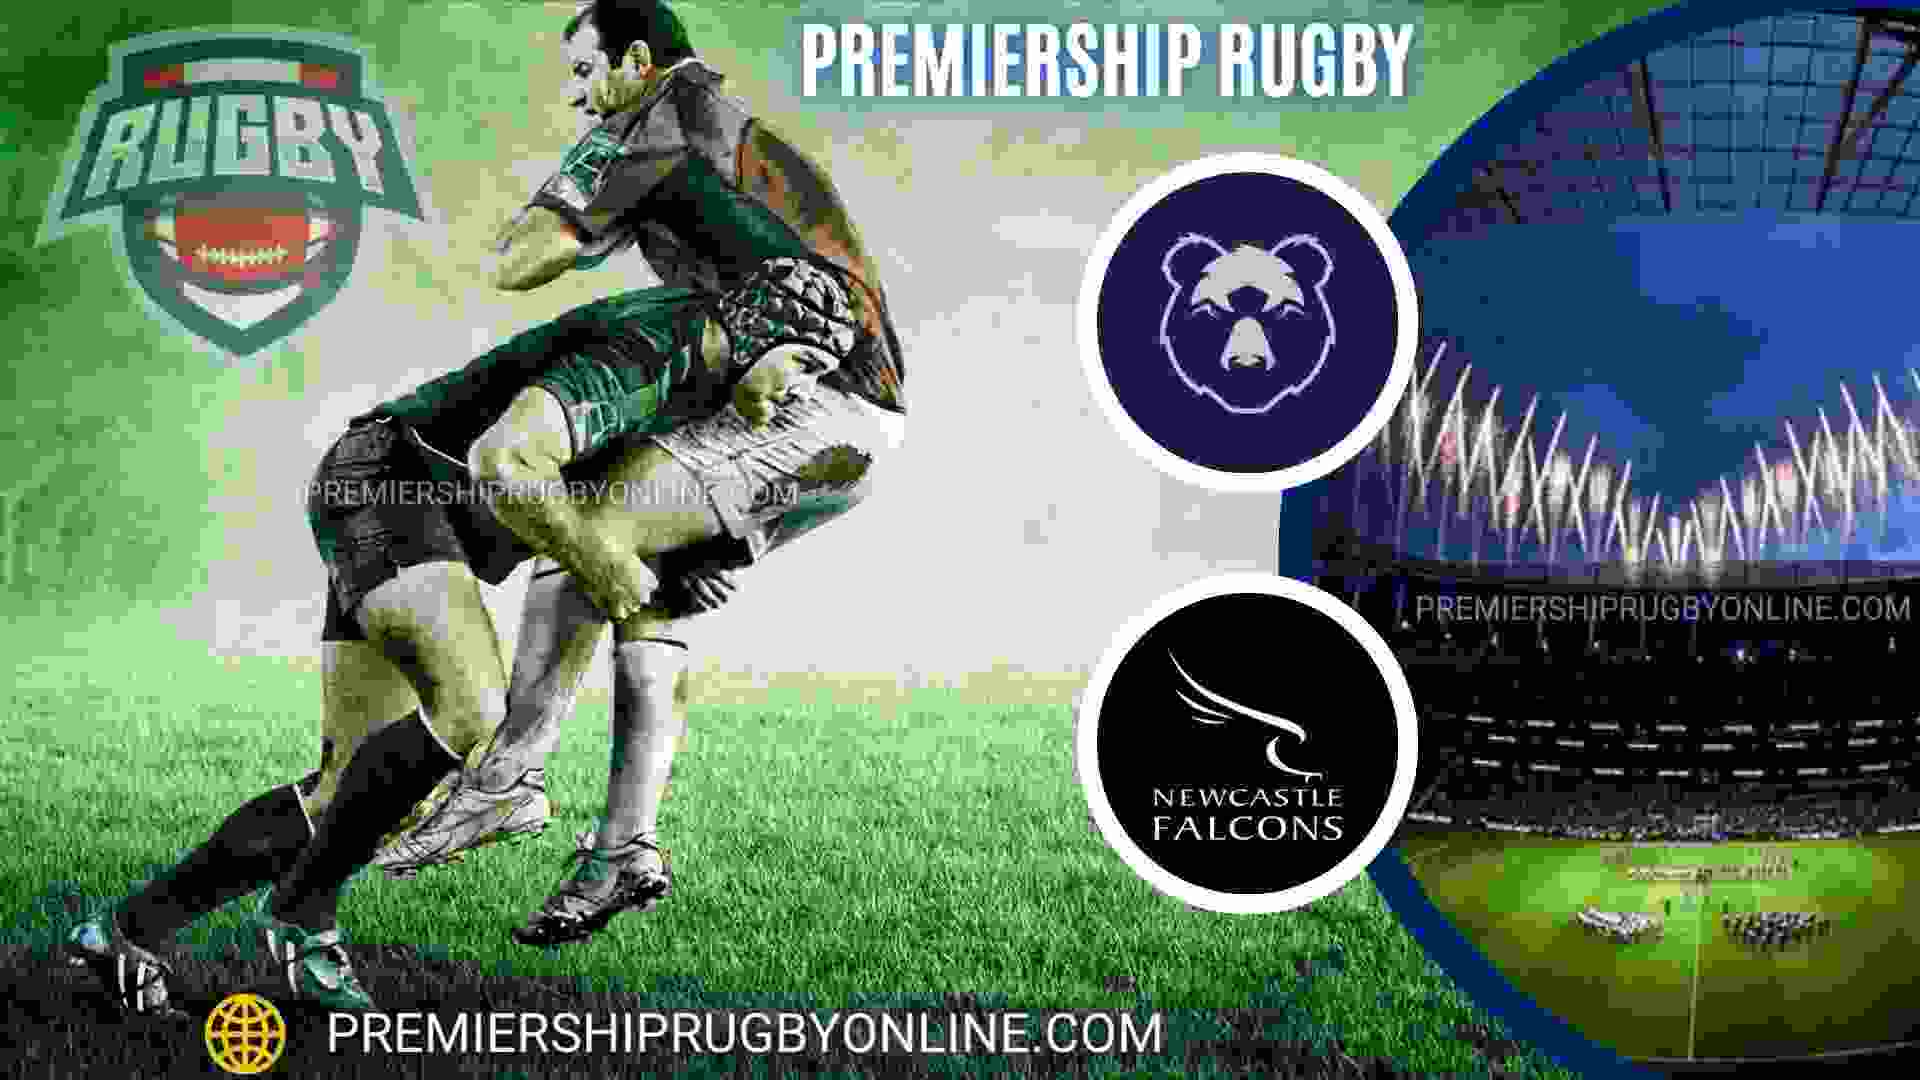 Live Bristol Rugby Vs Newcastle Falcons Online